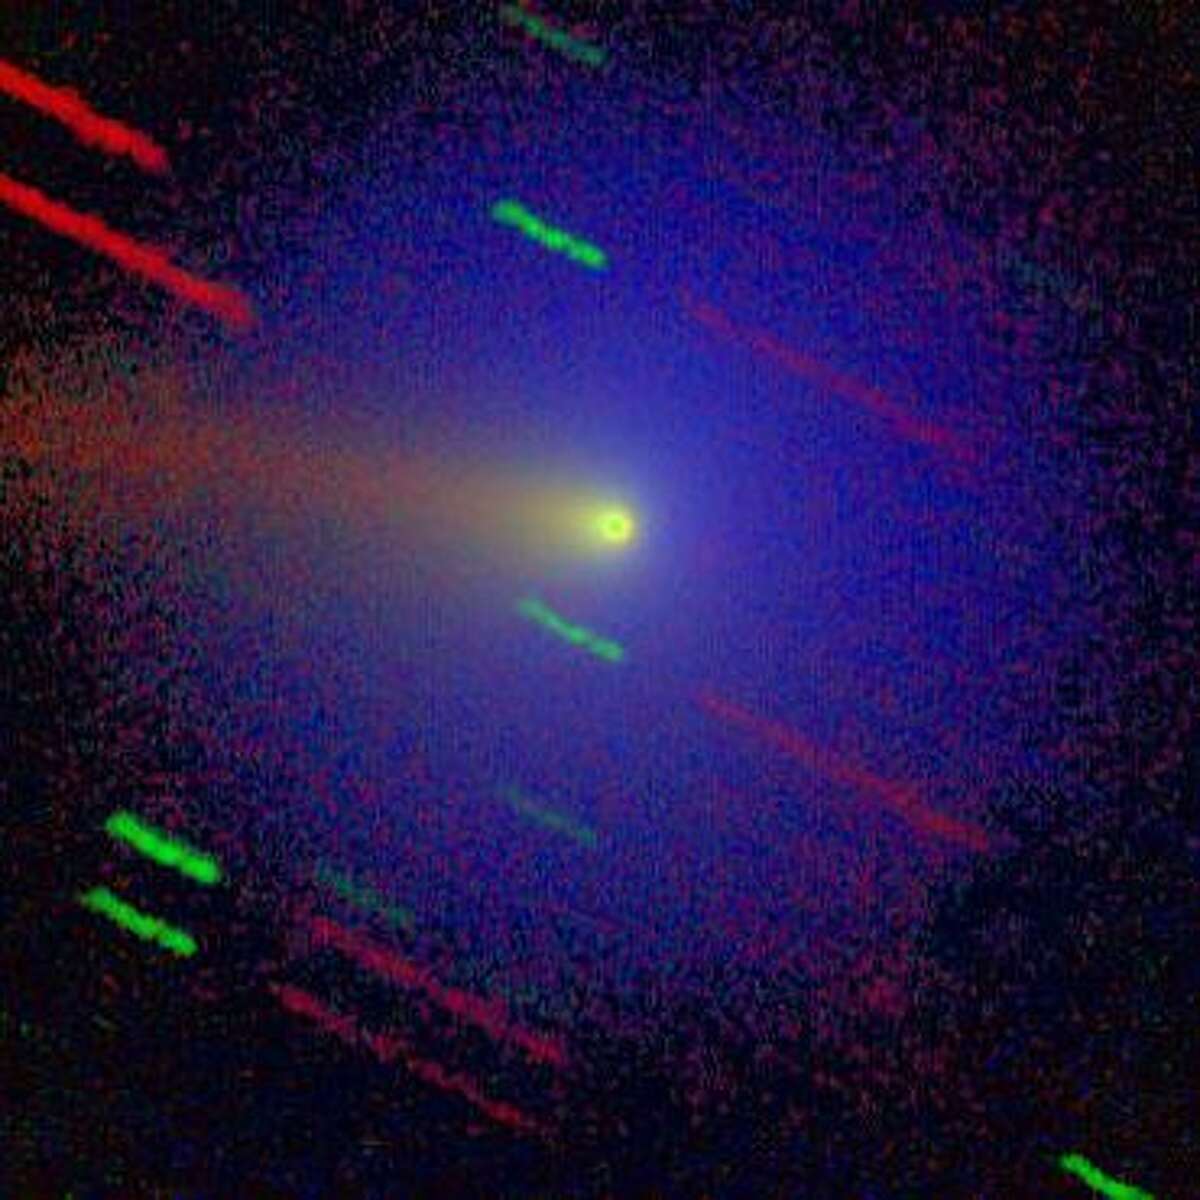 Comet Wirtanen shows up in this three-color image from an earlier pass by the sun in 2012.